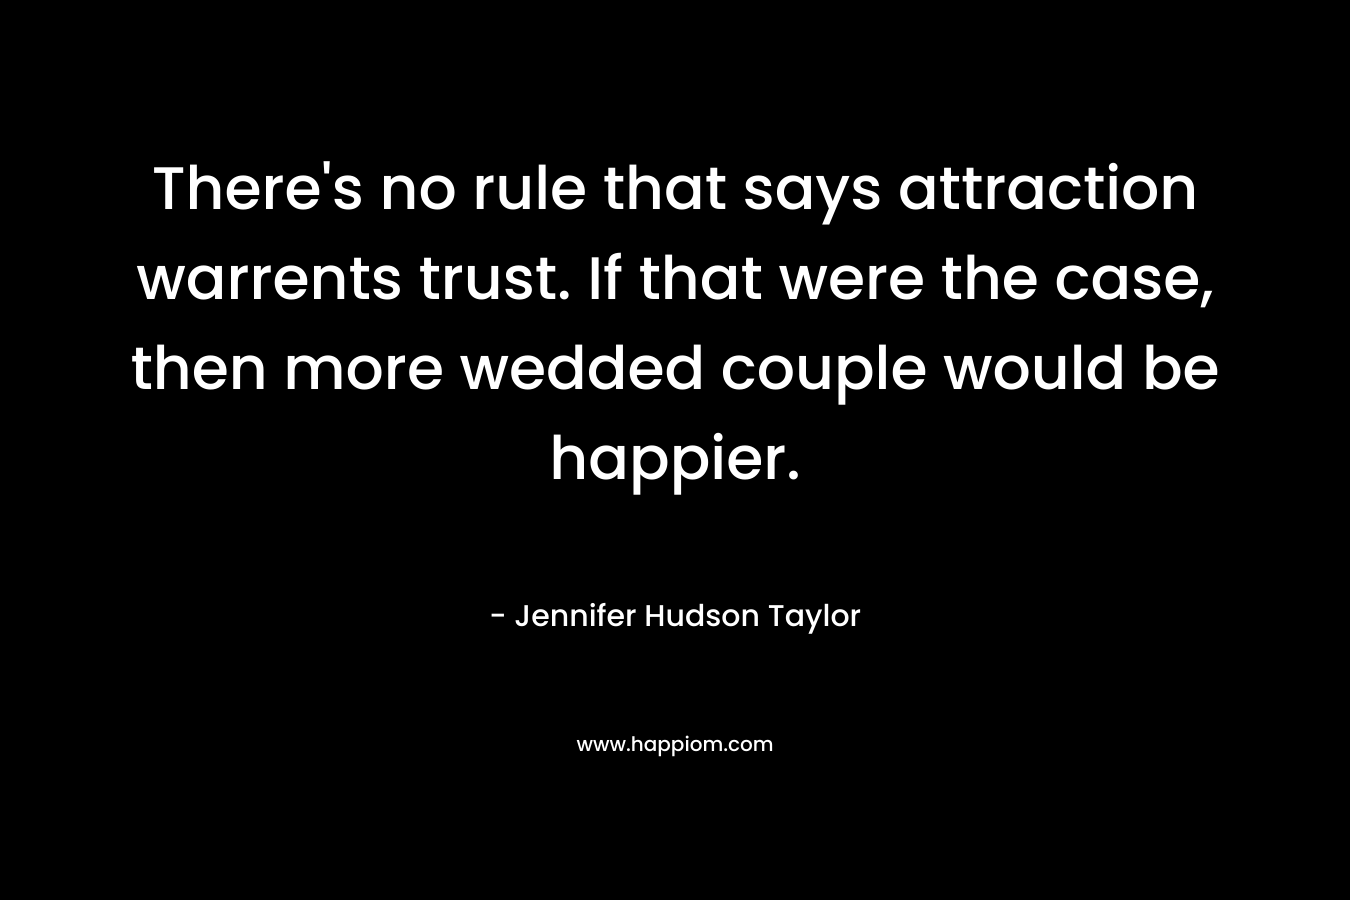 There's no rule that says attraction warrents trust. If that were the case, then more wedded couple would be happier.